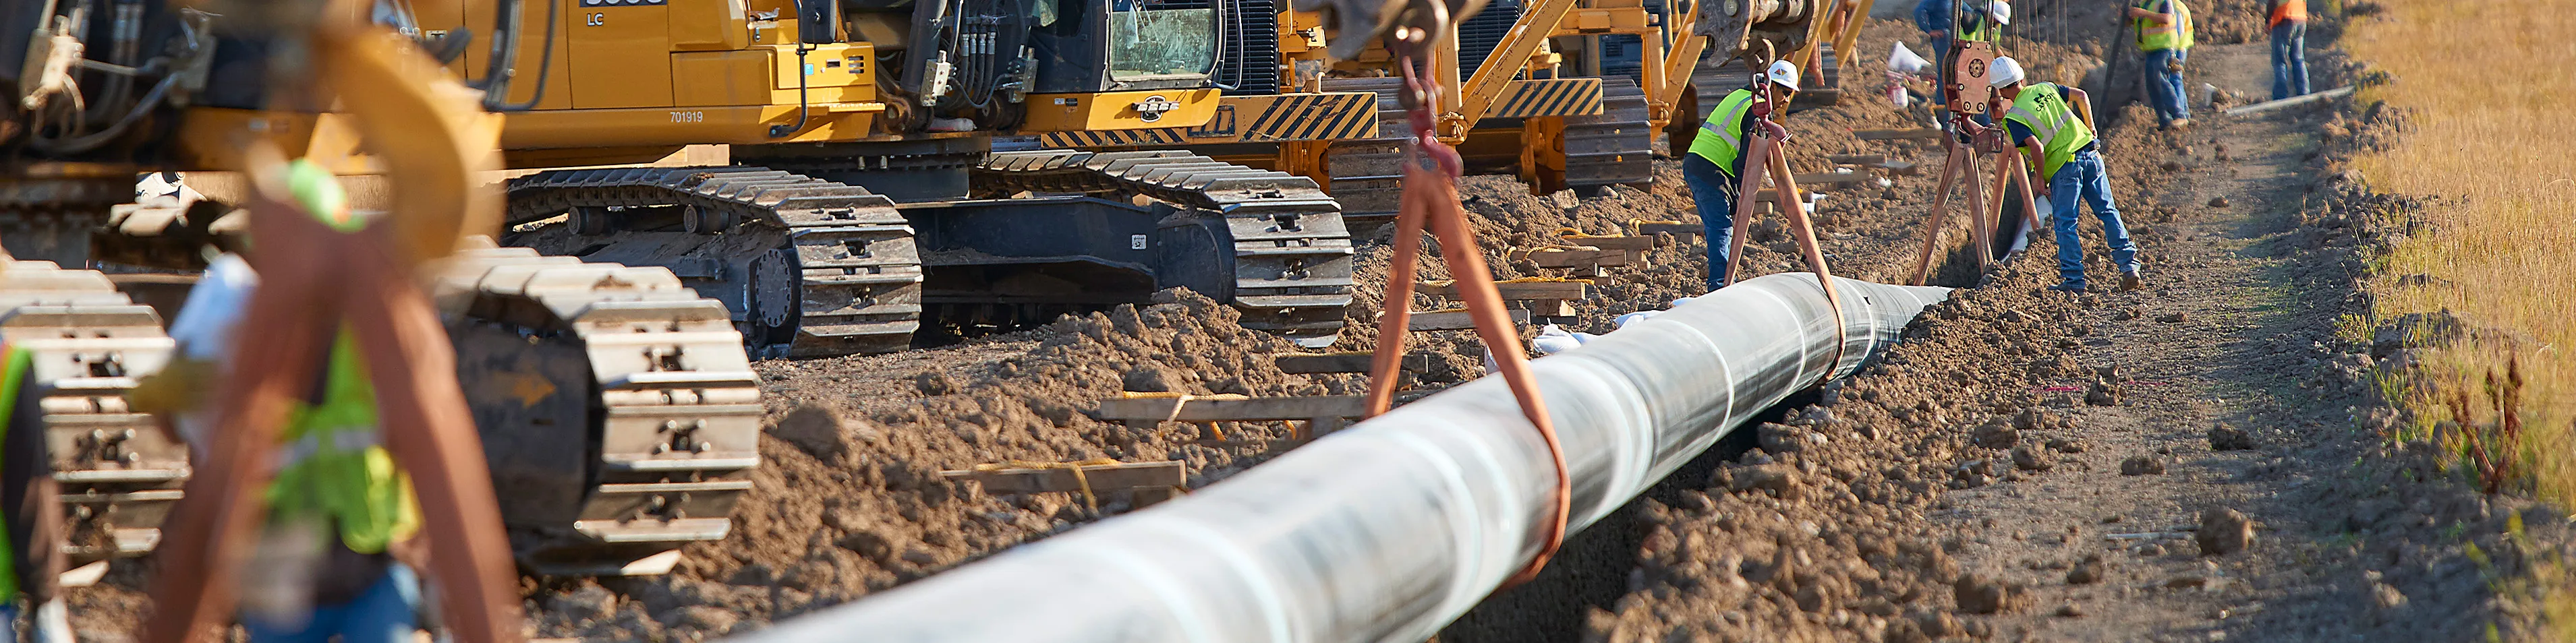 Pipeline being put into the ground